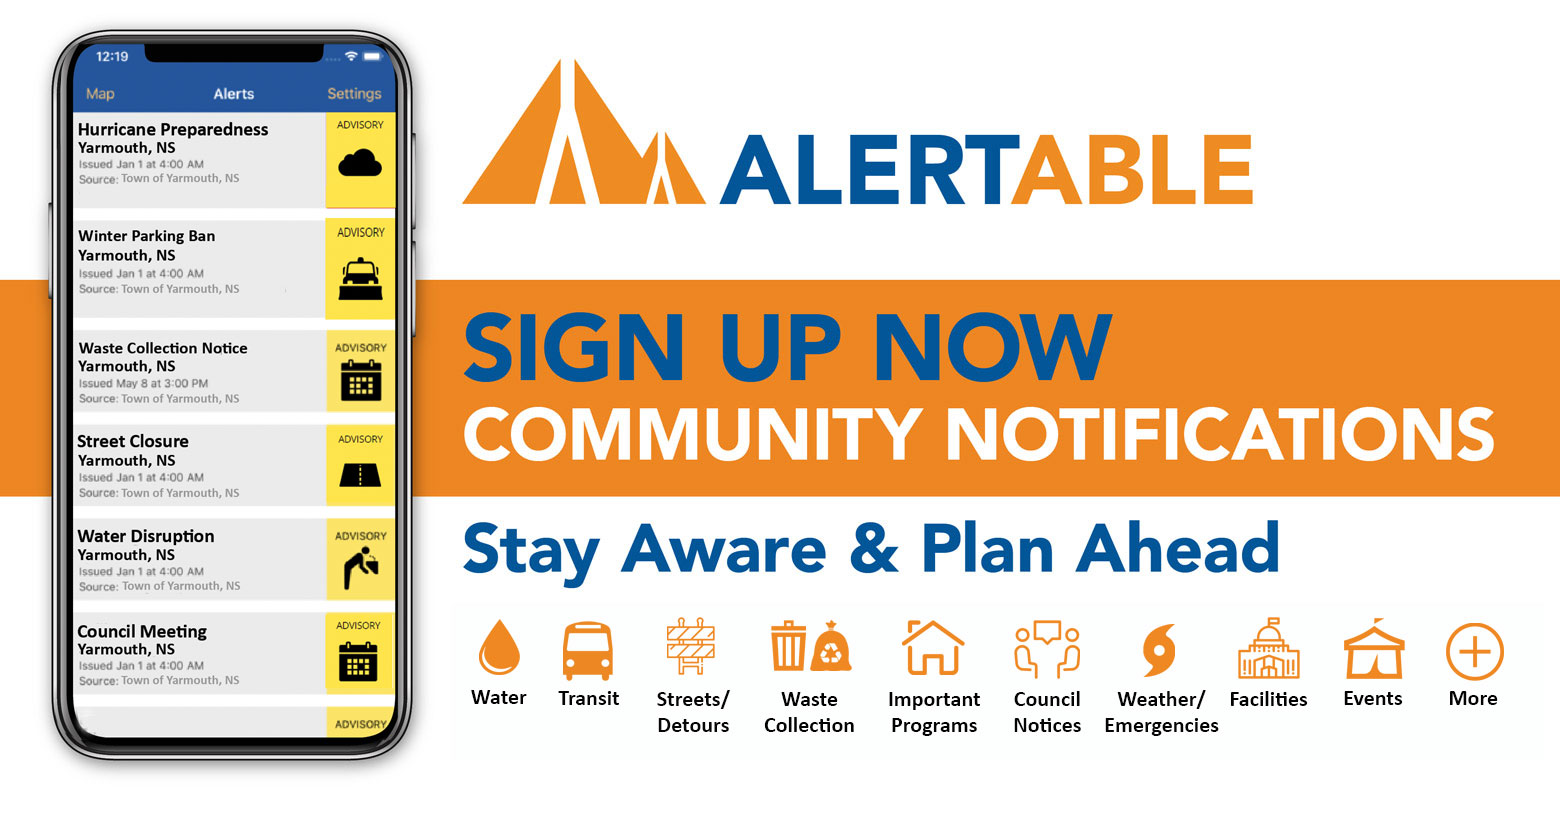 ALERTABLE - Sign Up Now - Community Notifications. Flood | School | Water | Pandemic | Facility | Service | Road | More